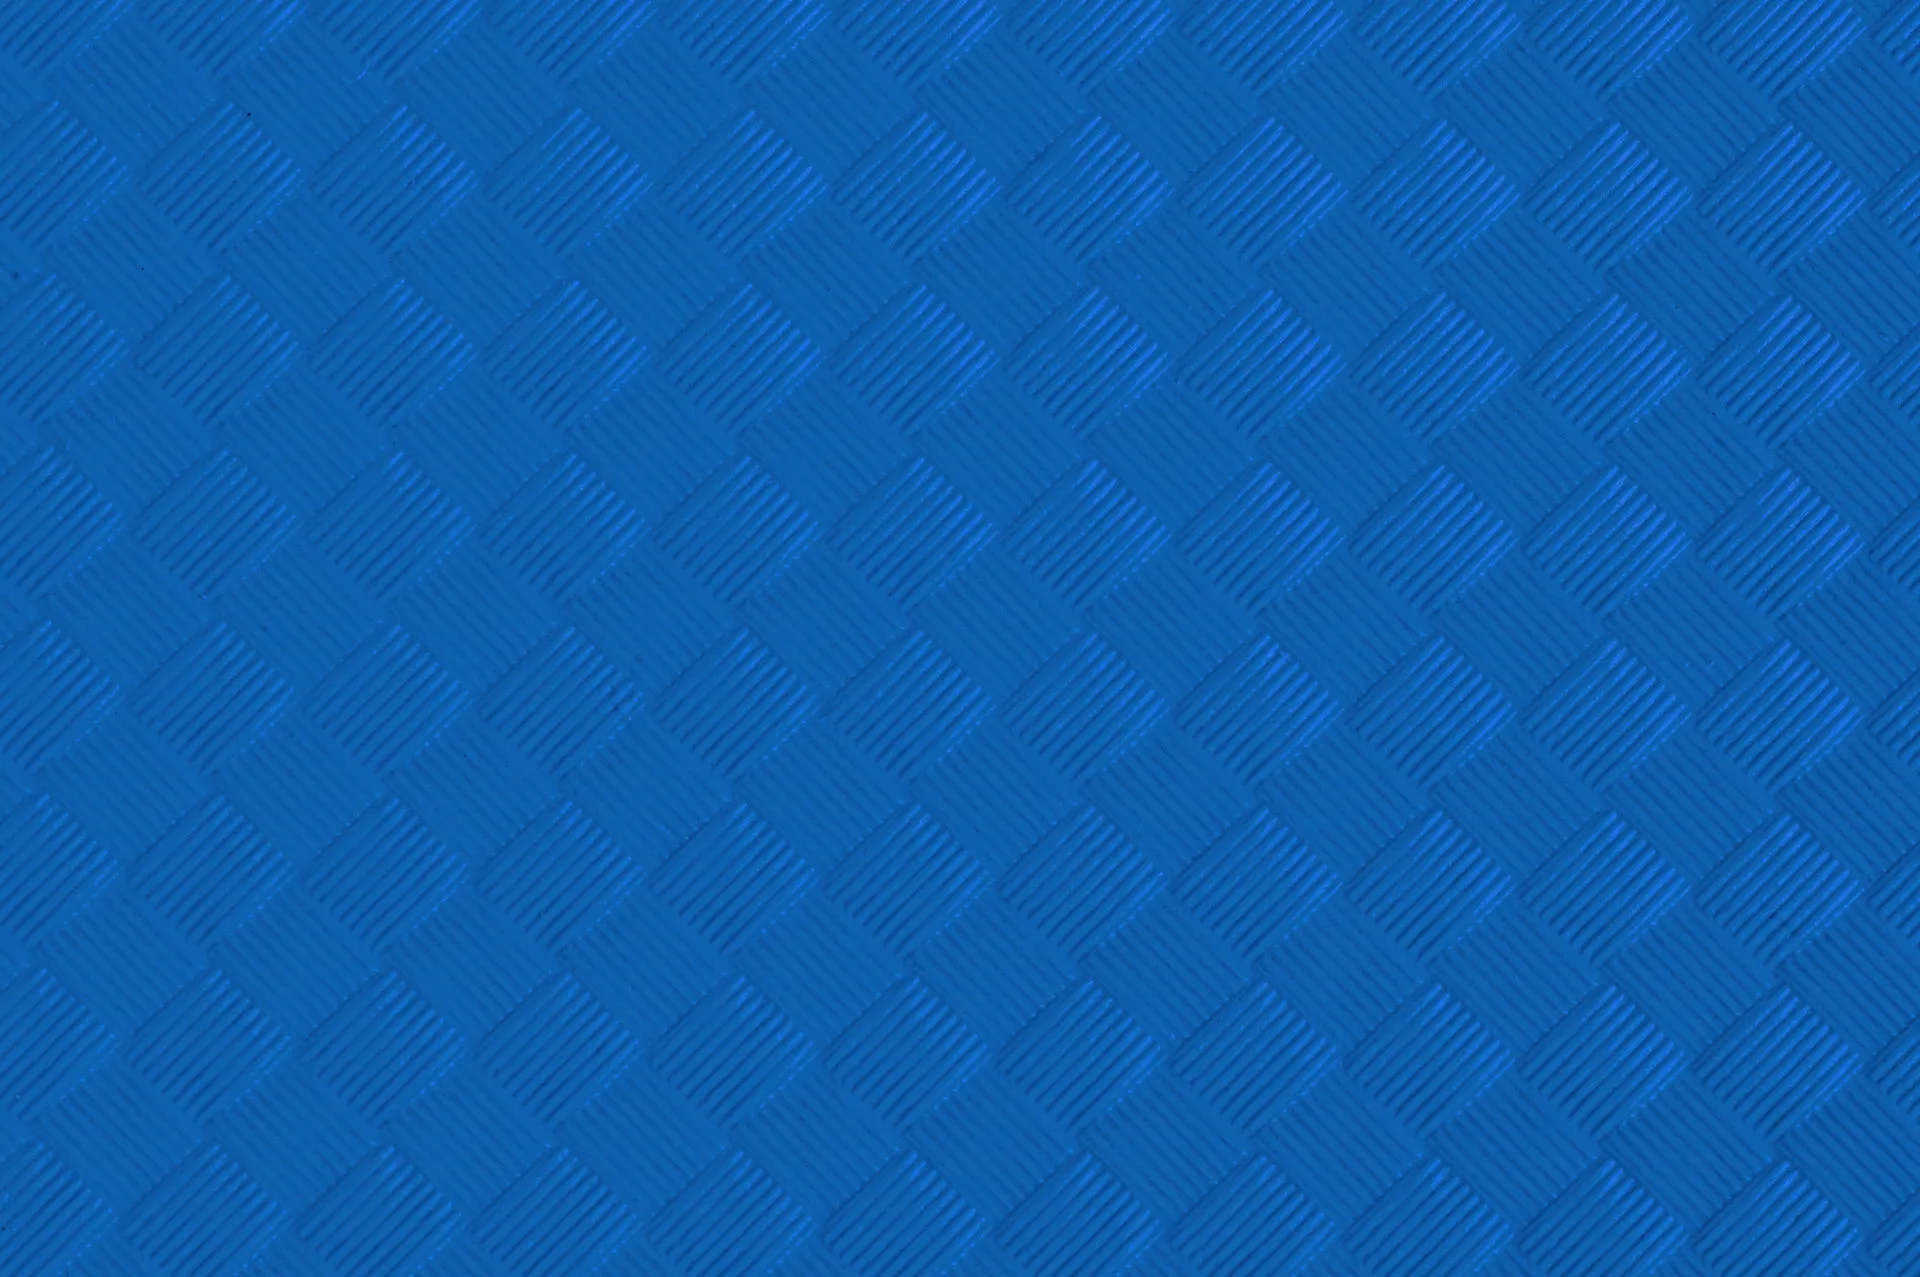 blue btext covering